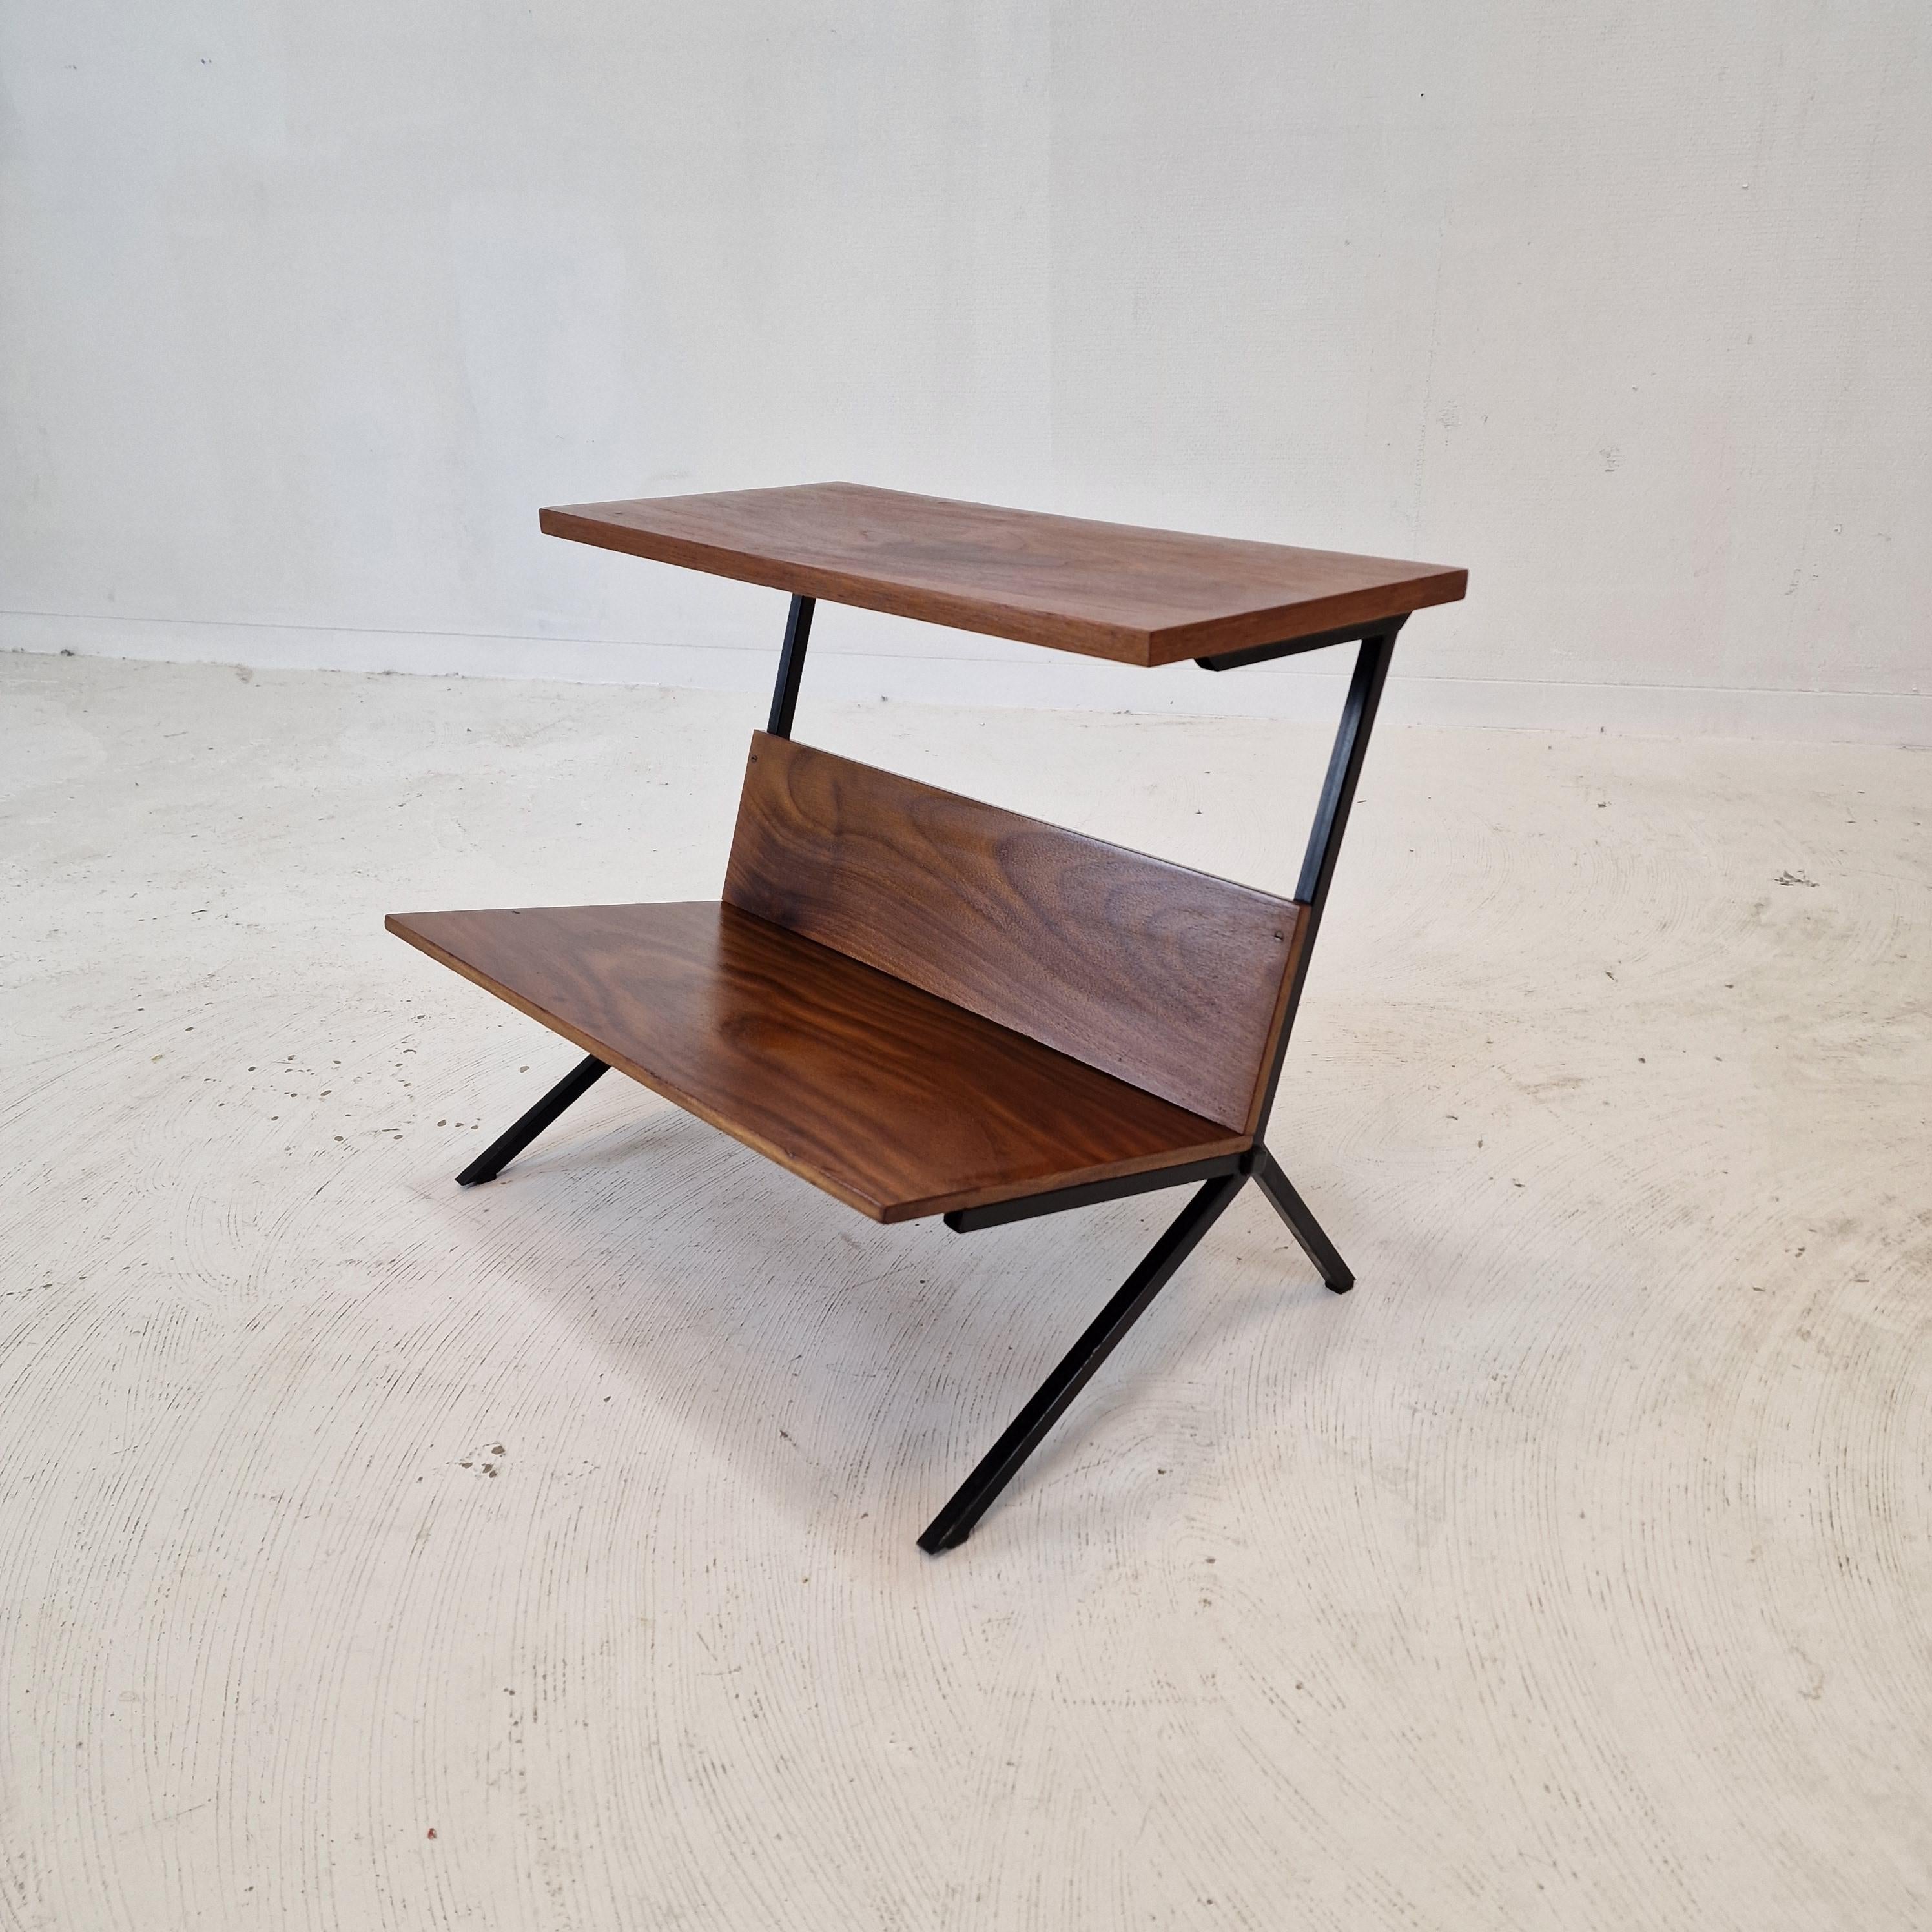 Very nice Dutch side table with magazine rack, fabricated in the 60's. 

It is made of teak veneer and a black painted metal structure.

We work with professional packers and shippers, we can deliver worldwide in 5 to 10 days.